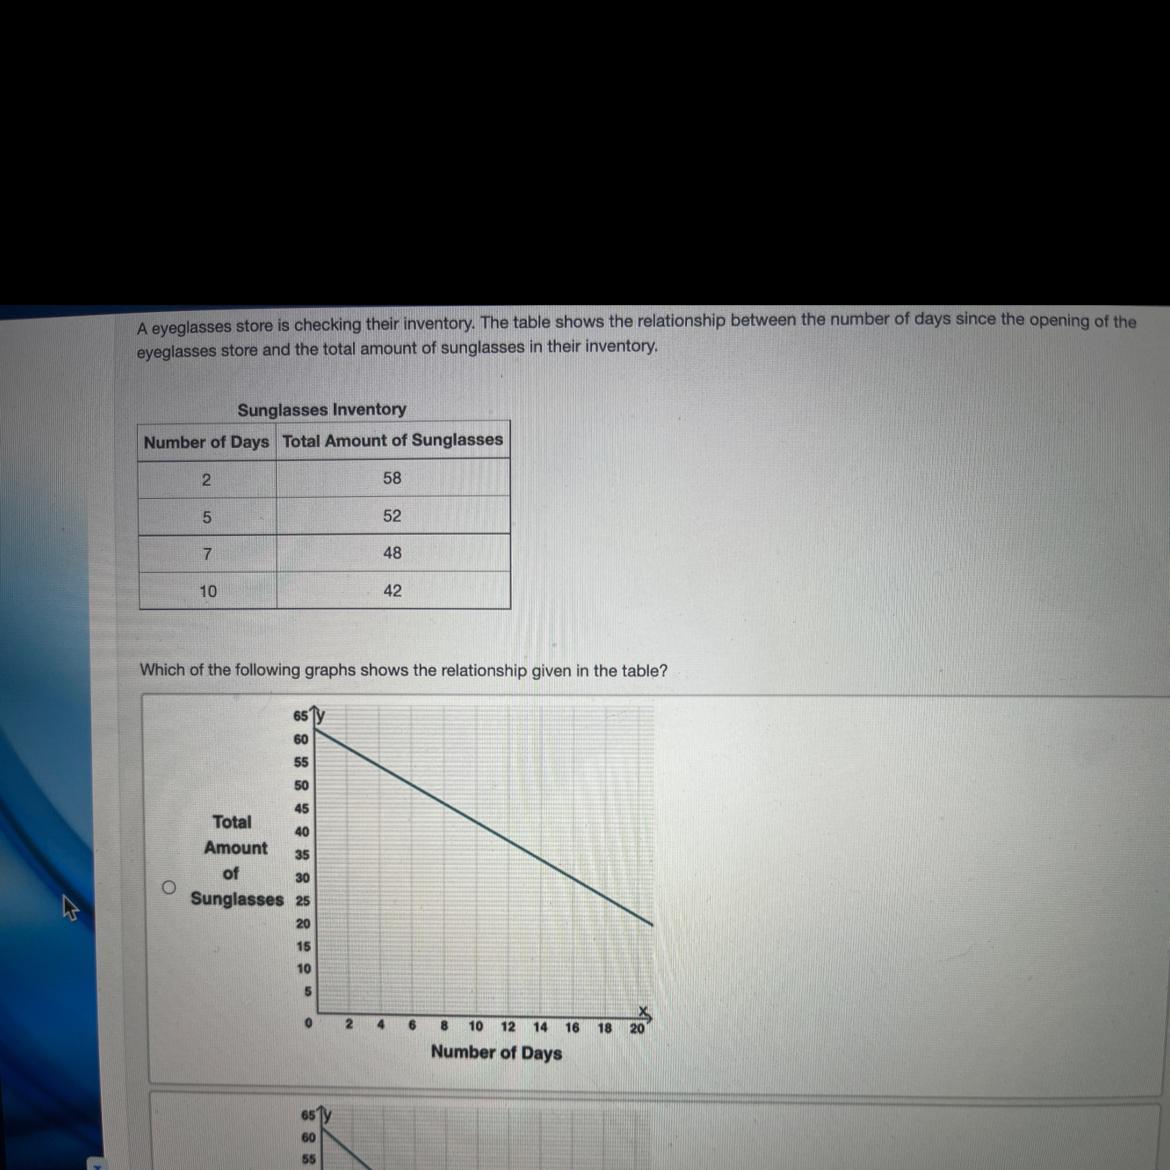 I Need Help With This. Also, Im Aware You Cant See All The Graphs Listed So Just Let Me Know What Coordinates